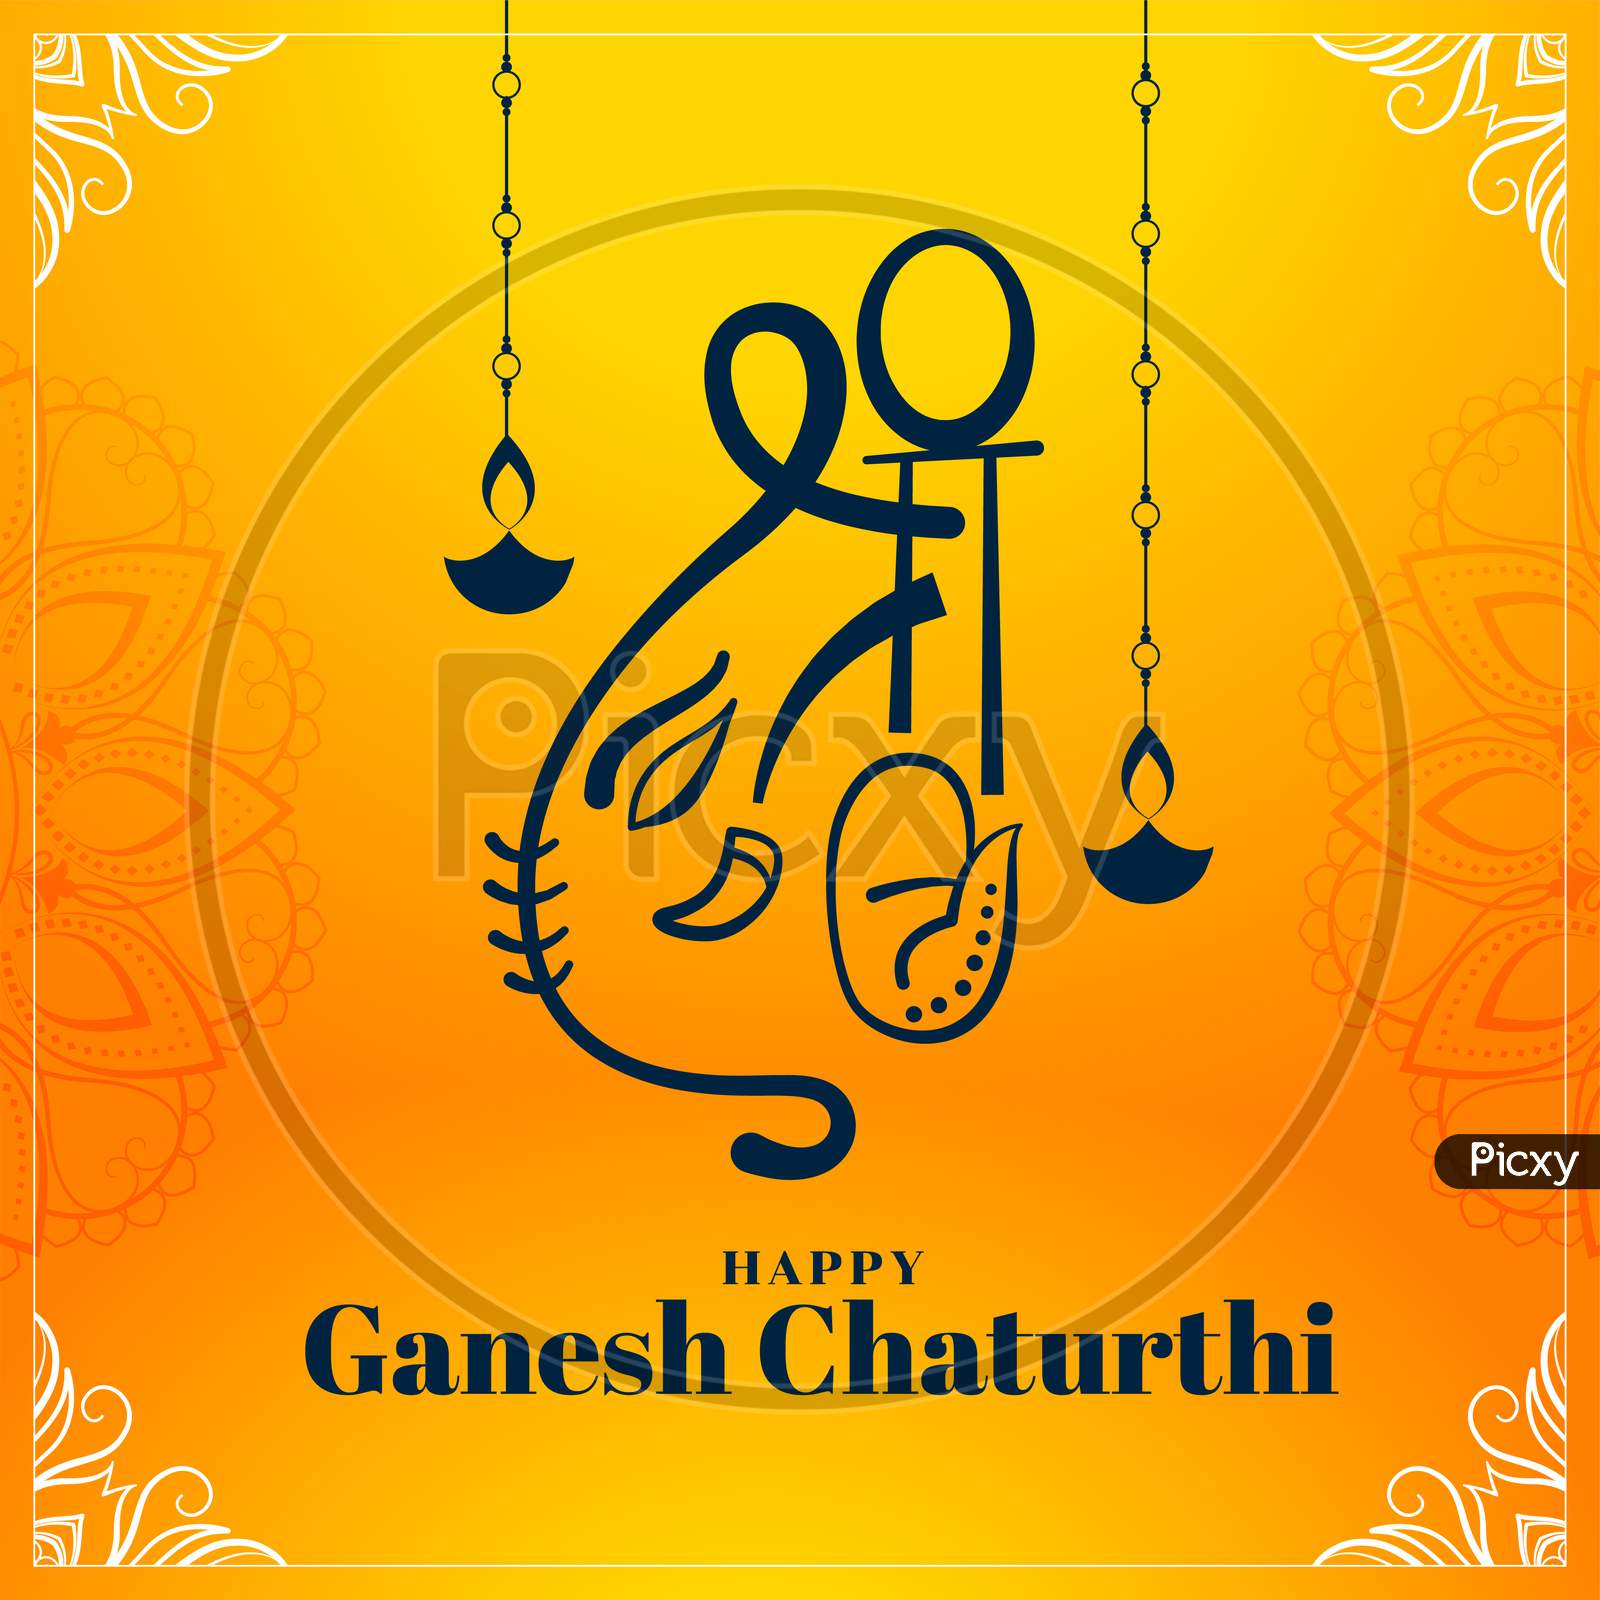 Beautiful Ganesh Chaturthi Festival Card Design In Yellow Color